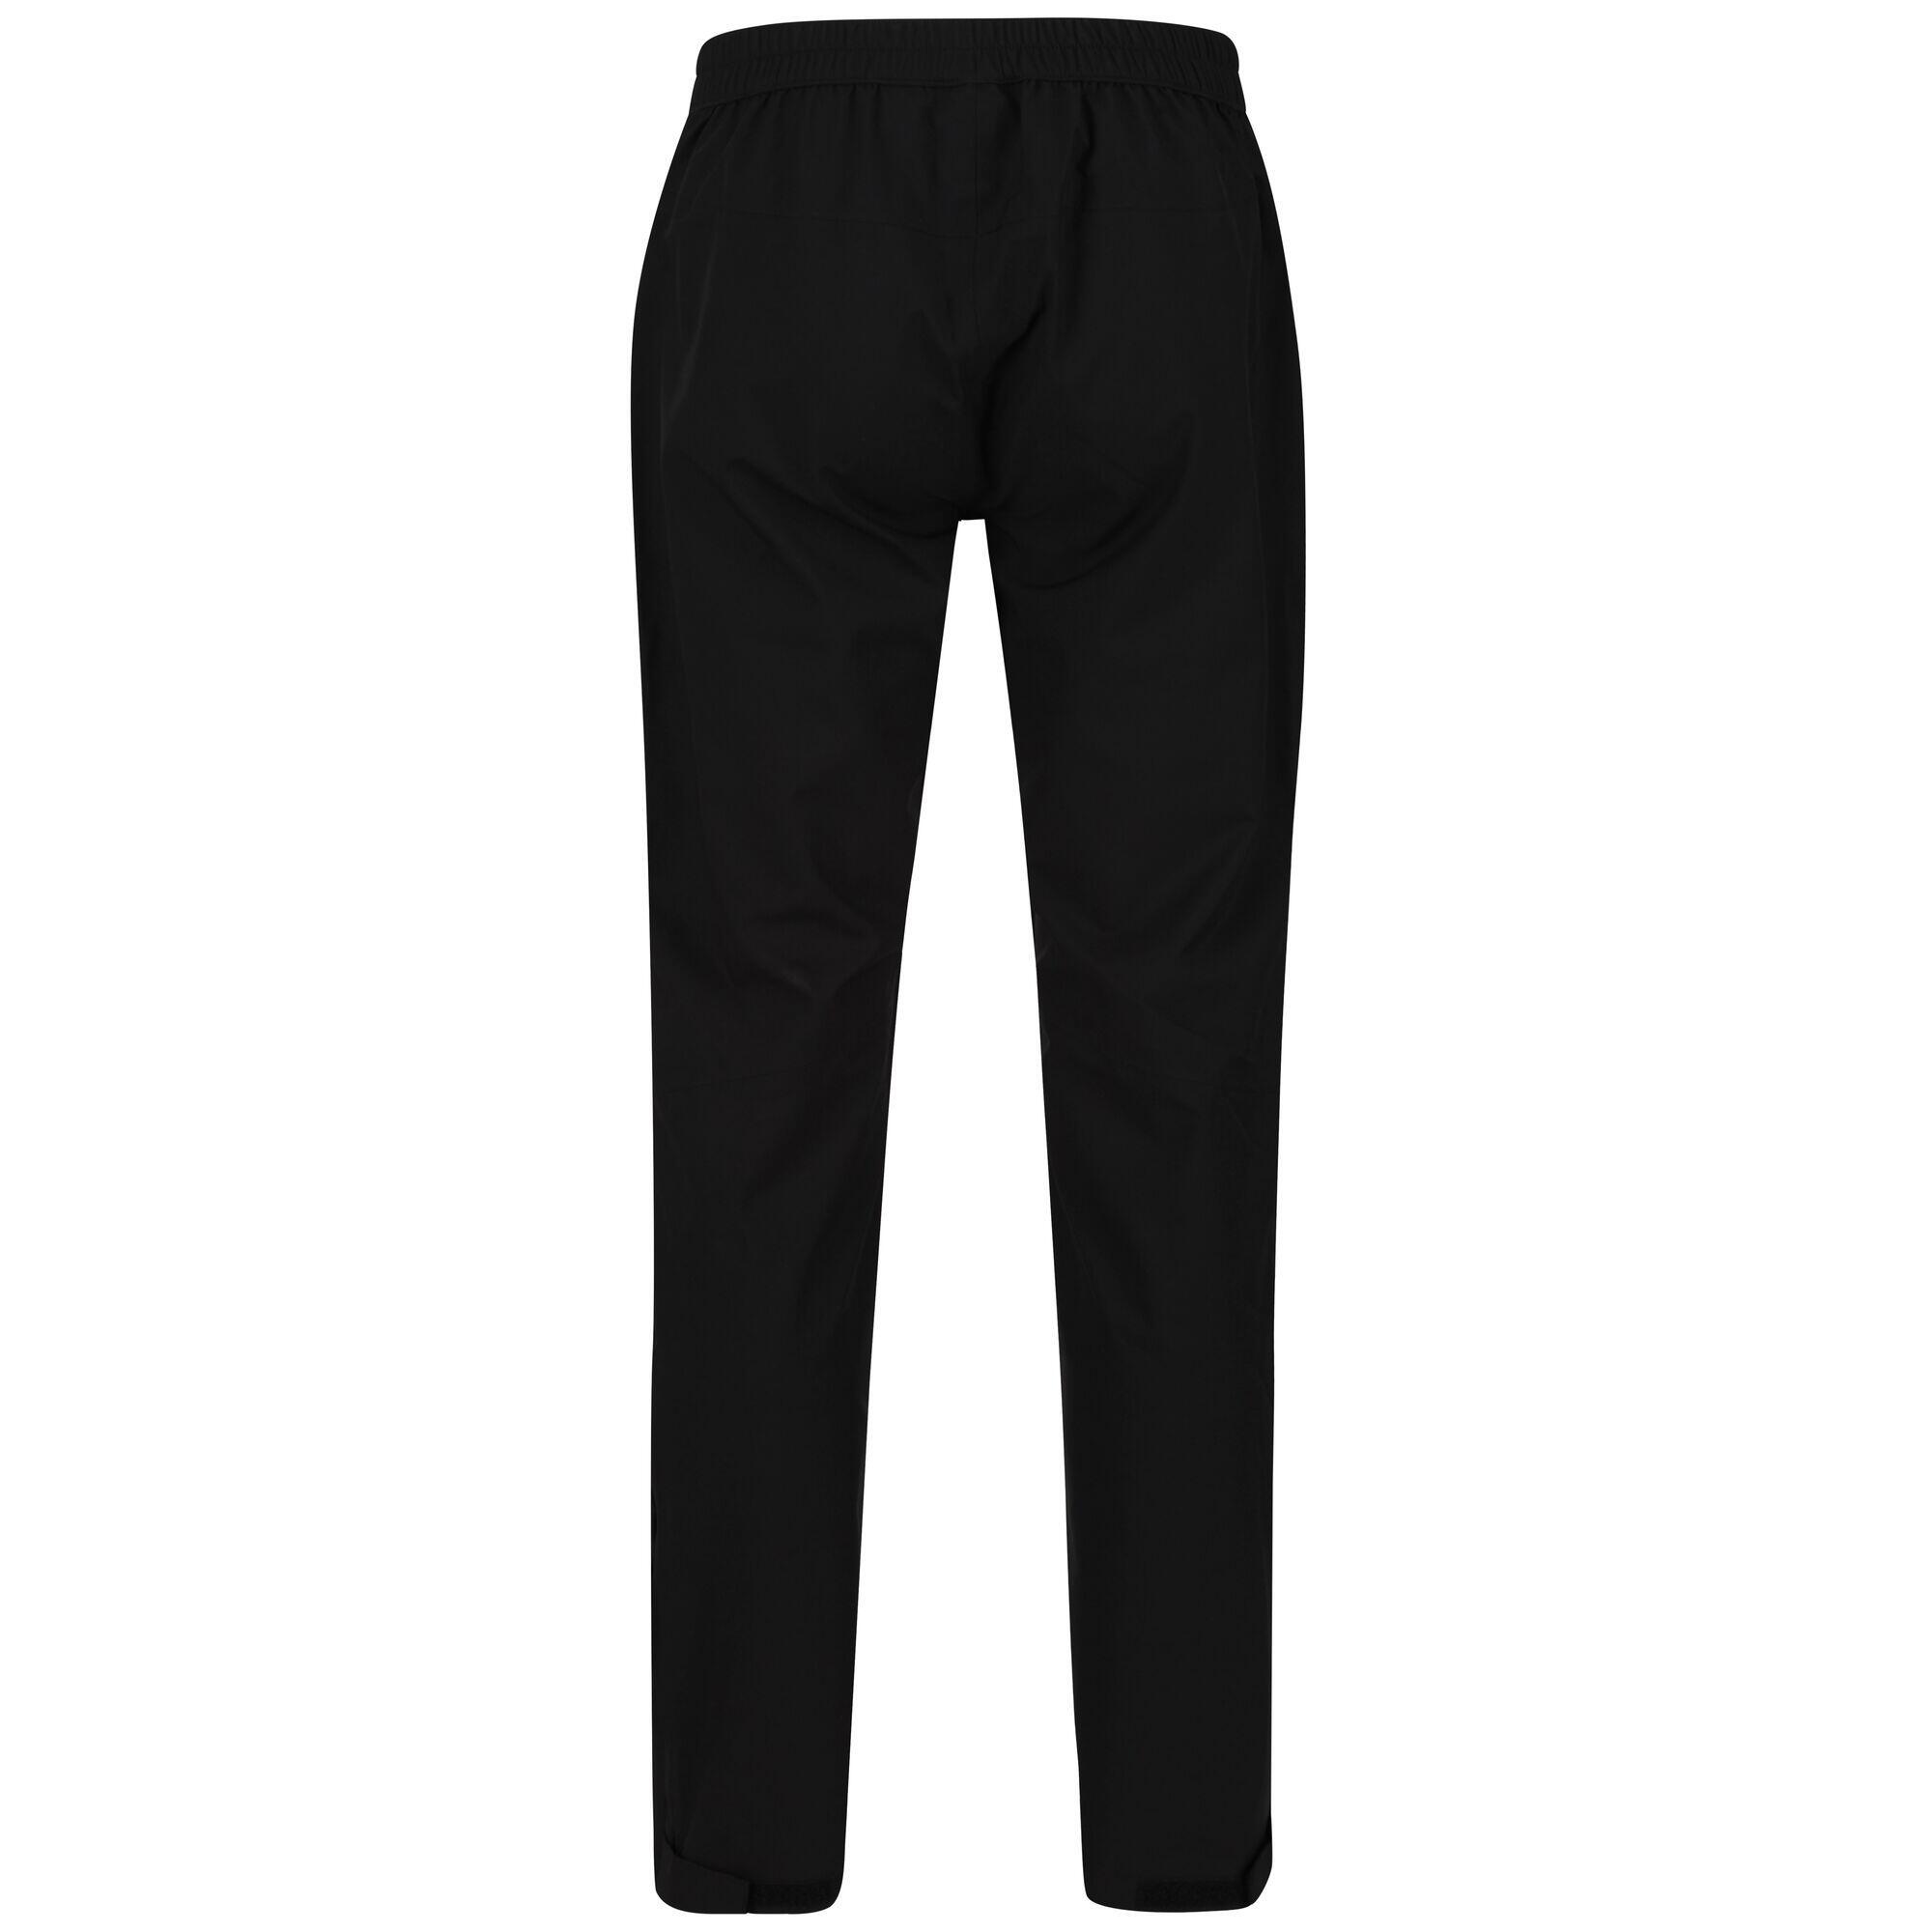 Mens Highton Stretch Overtrousers (Black) 2/5